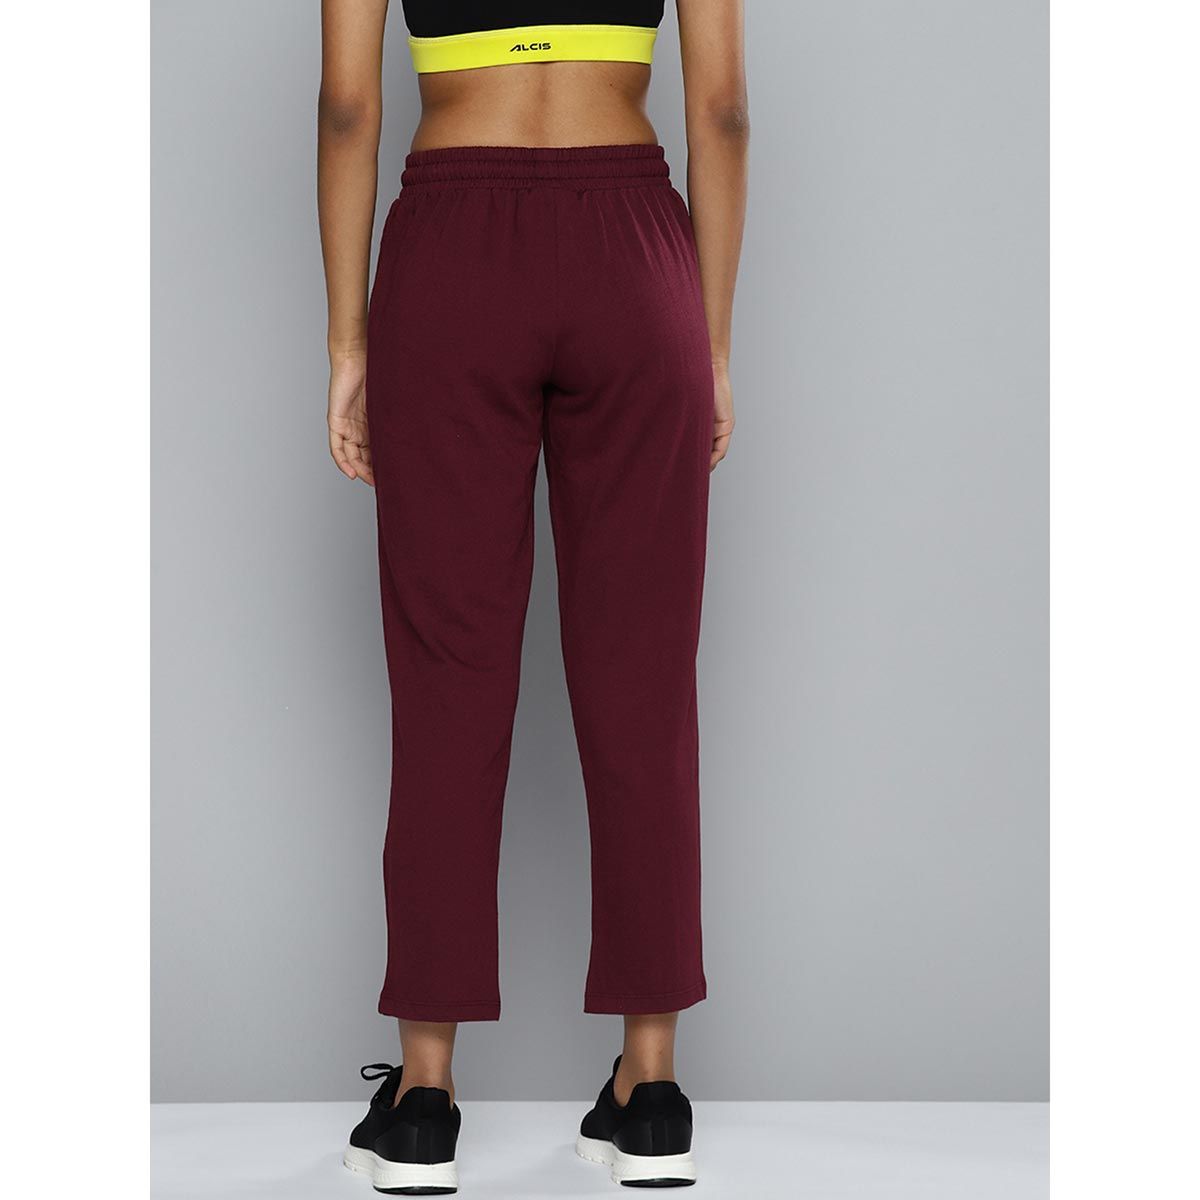 Buy Womens Microfiber Fabric Straight Fit Trackpants with Stay Dry  Treatment  Wine Tasting MW54  Jockey India